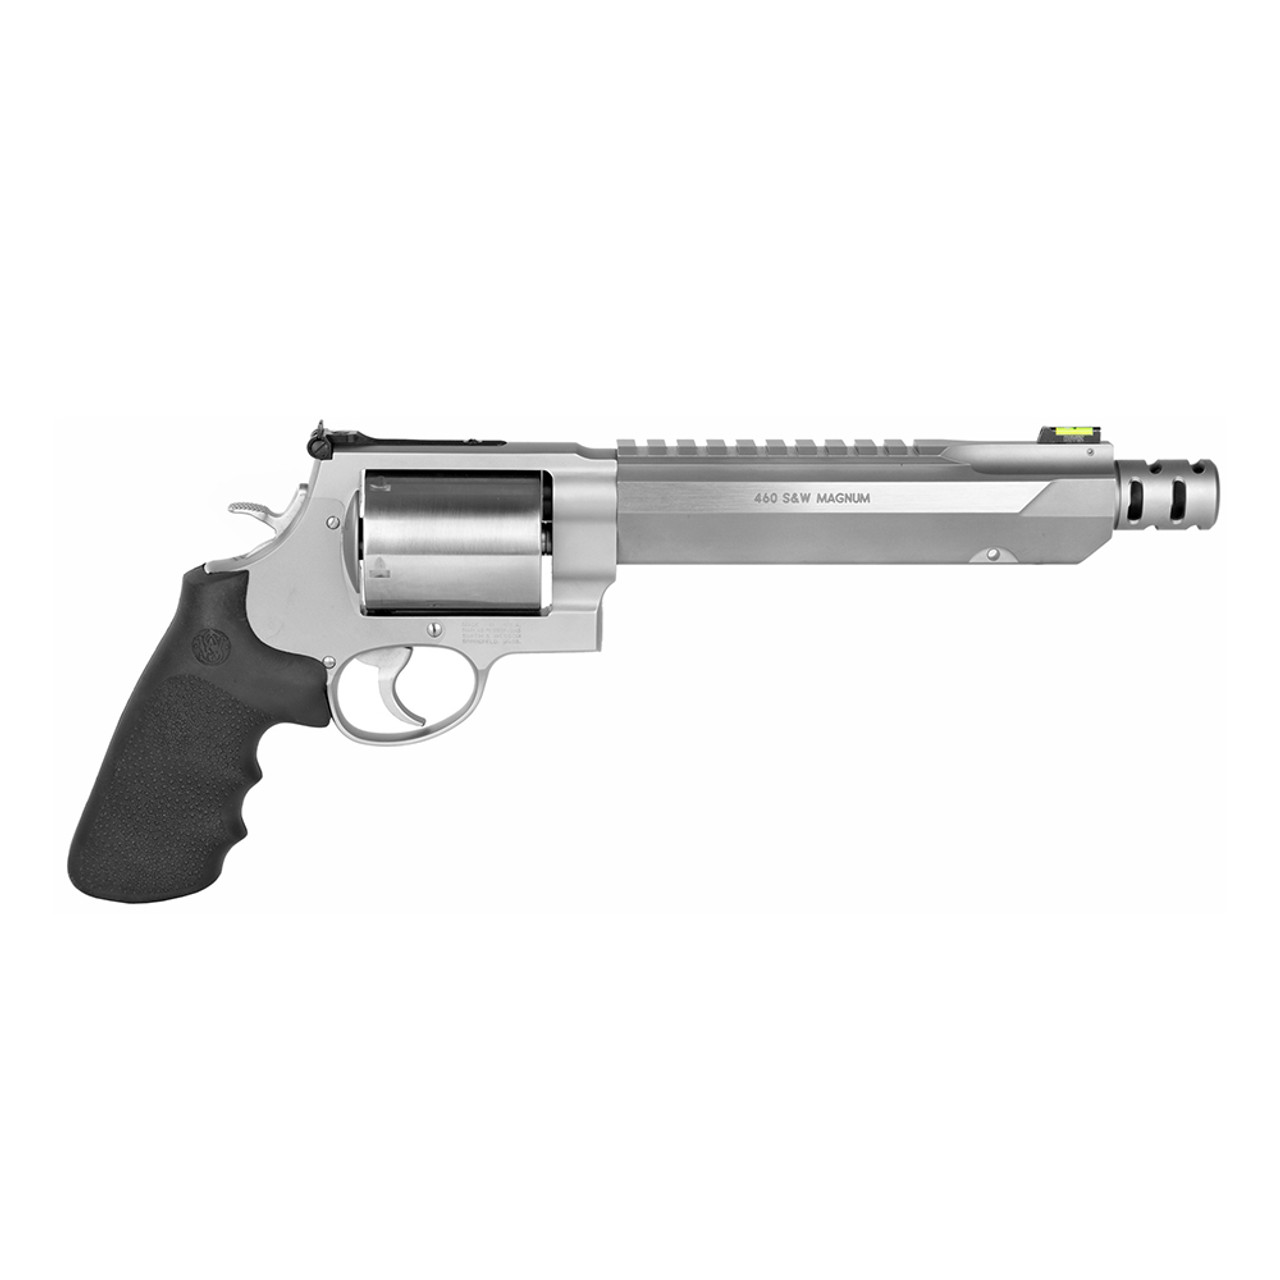 Smith & Wesson Model 460XVR Performance Center (Top Rail) CALIFORNIA LEGAL - .460 S&W - Stainless